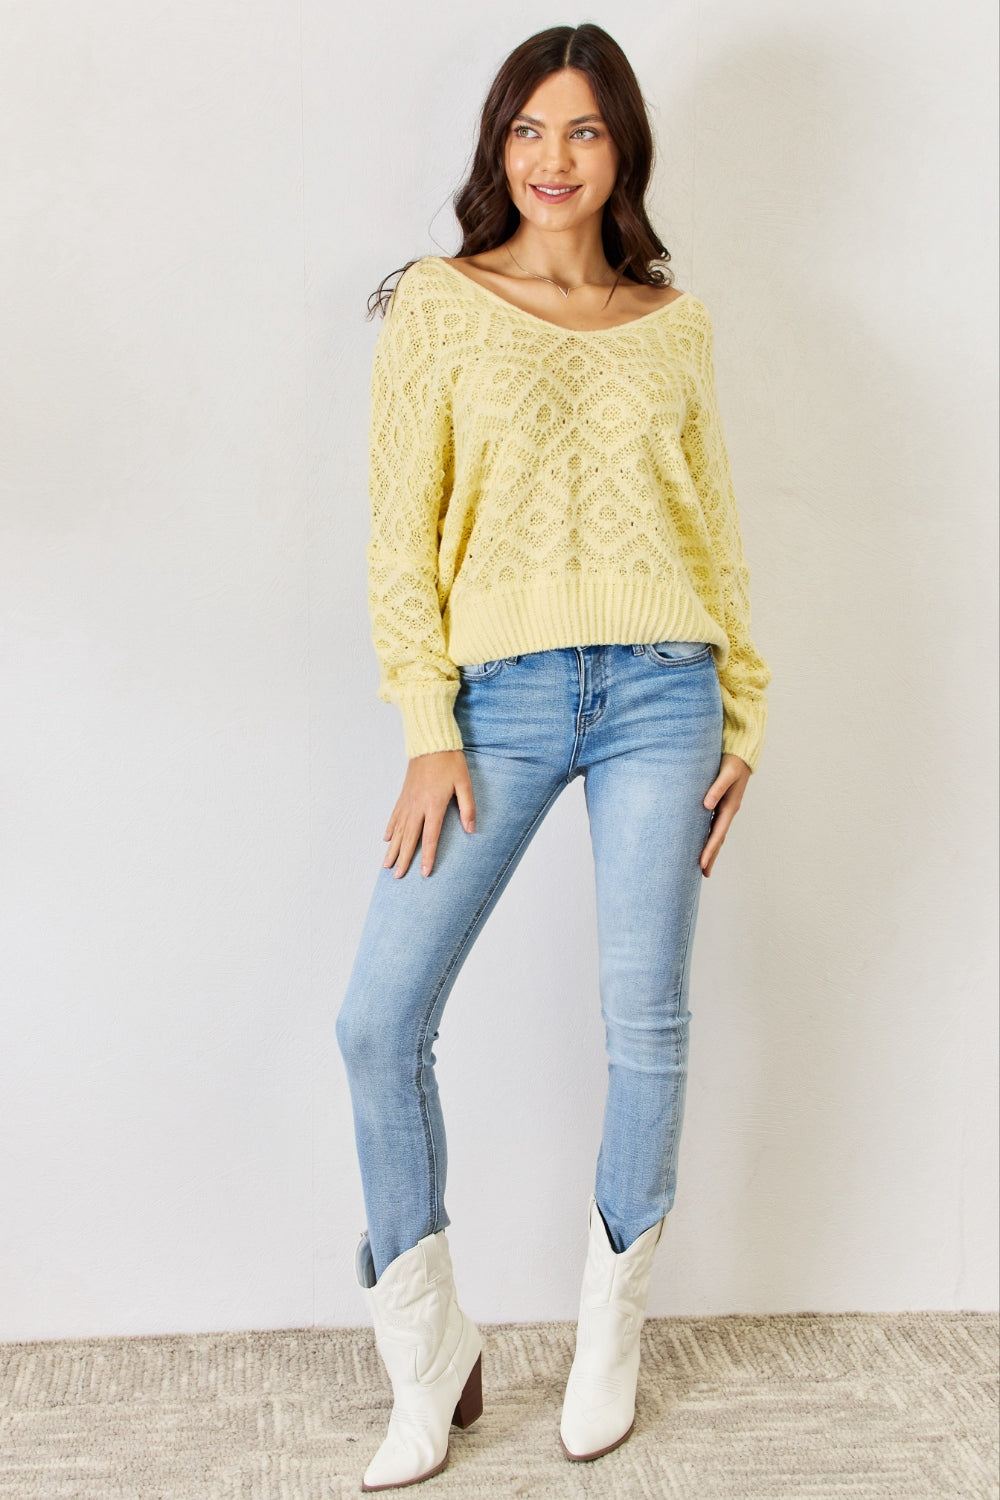 Yellow Knit Sweater - Inspired Eye Boutique